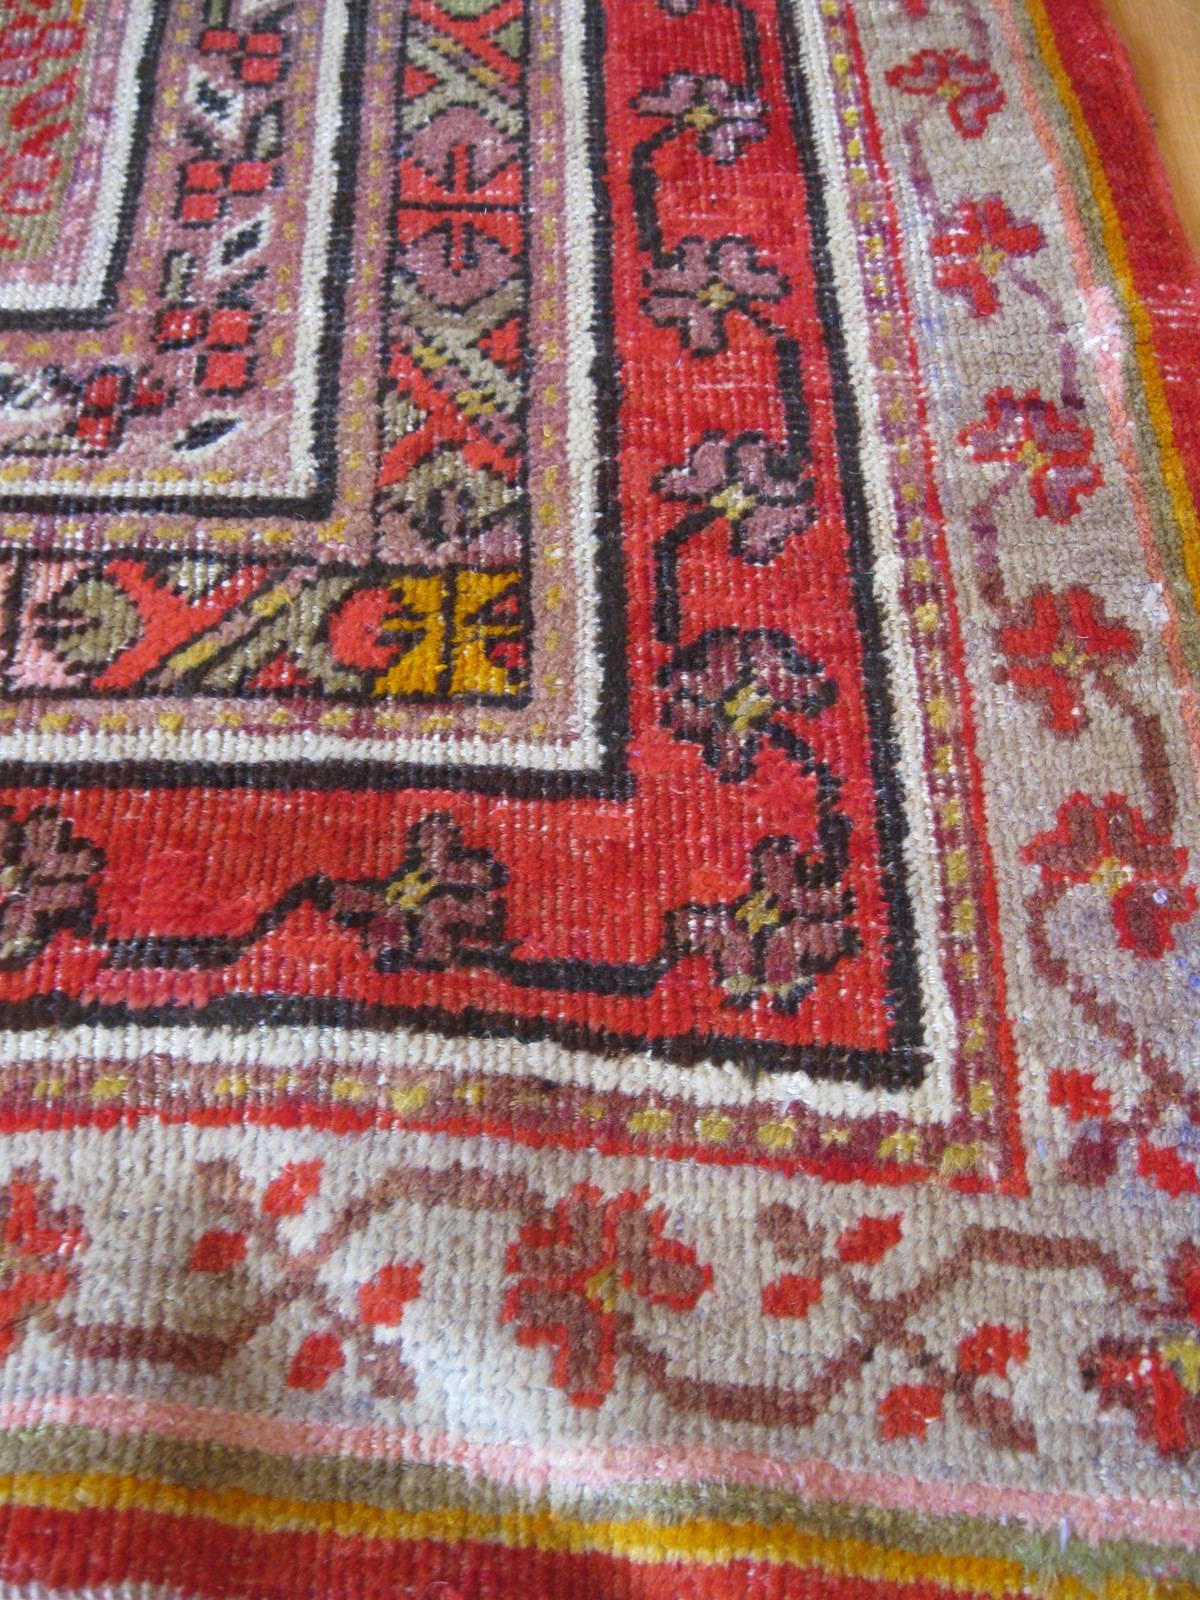 Antique Khotan Rug, circa 1890
9'2" x 17"

Antique Khotan Rug - originate from East Turkestan, the central hub of the famous Silk Route for more than 1000 years. Khotan rugs feature design of geometric Persian style incorporated with